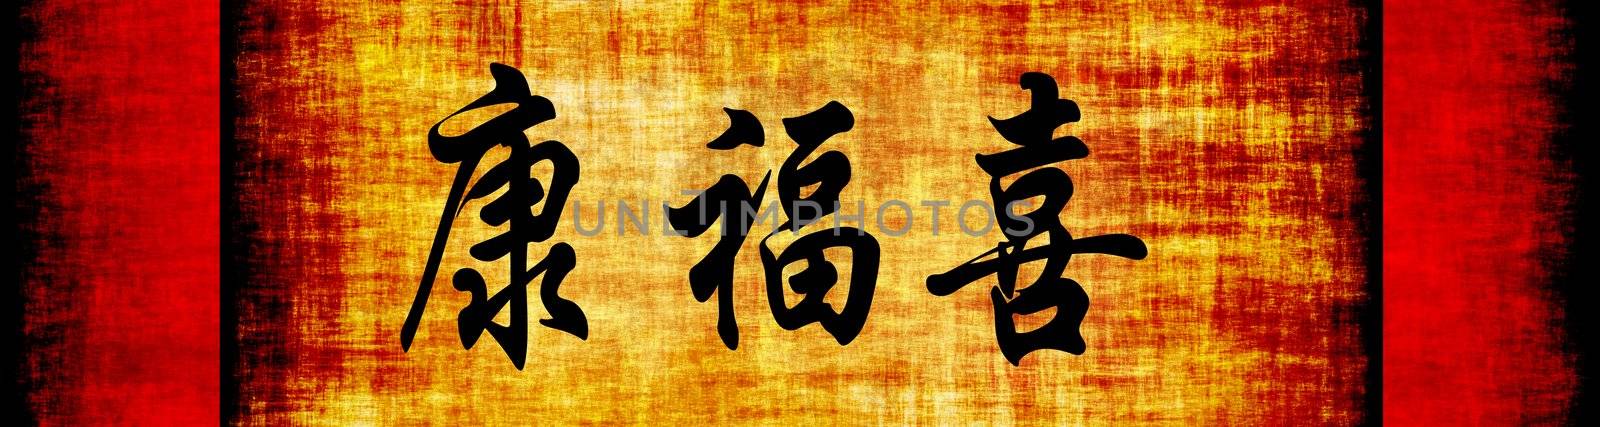 Health Wealth Happiness Chinese Motivational Phrase Banner